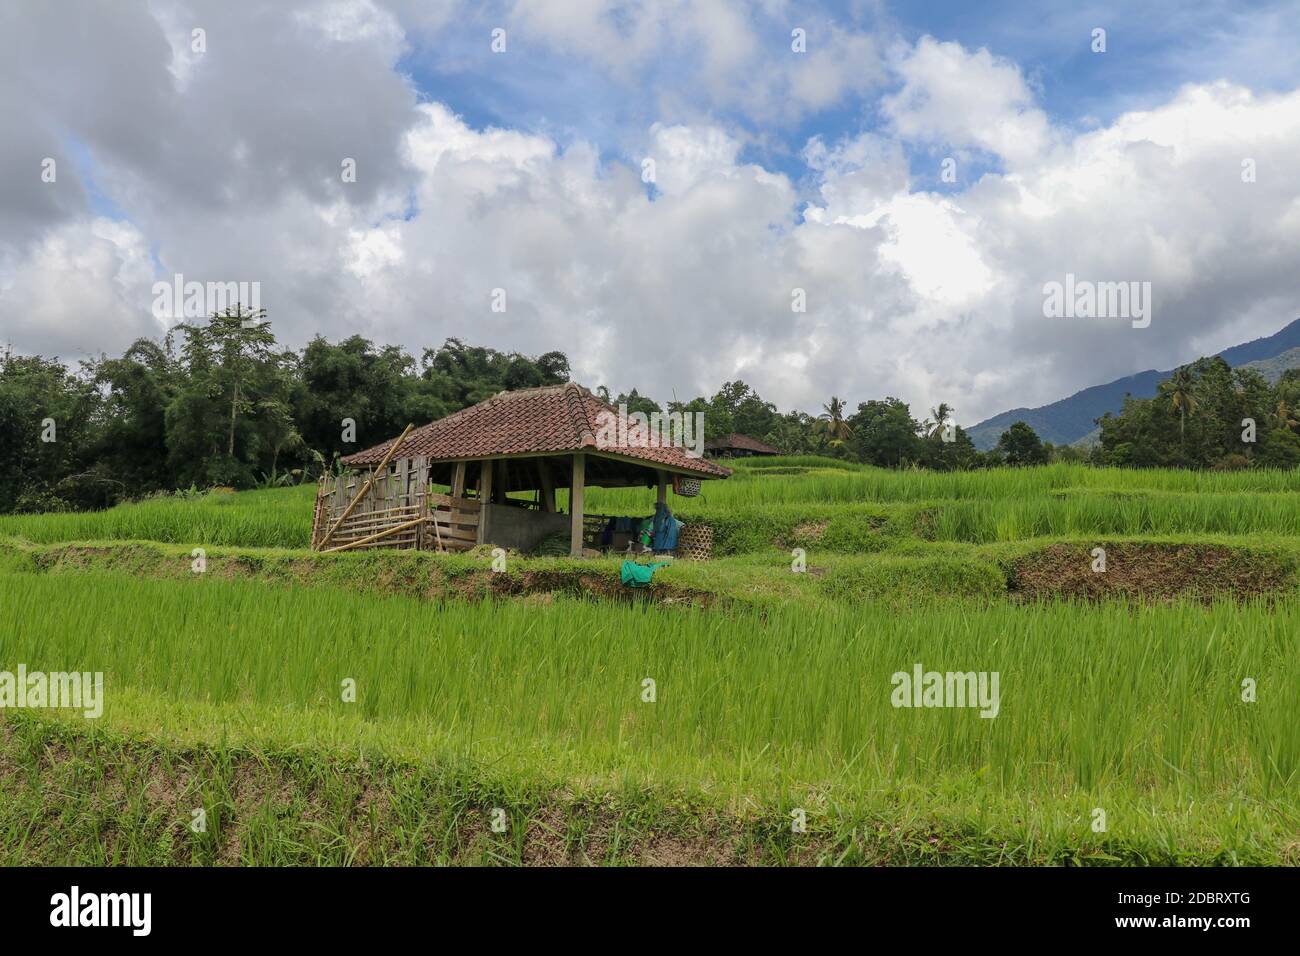 Beautiful landscape view of rice field with shelter for cows. View on a cowshed on rice terraces Stable for cattle among fields. Jatiluwih paddies in Stock Photo